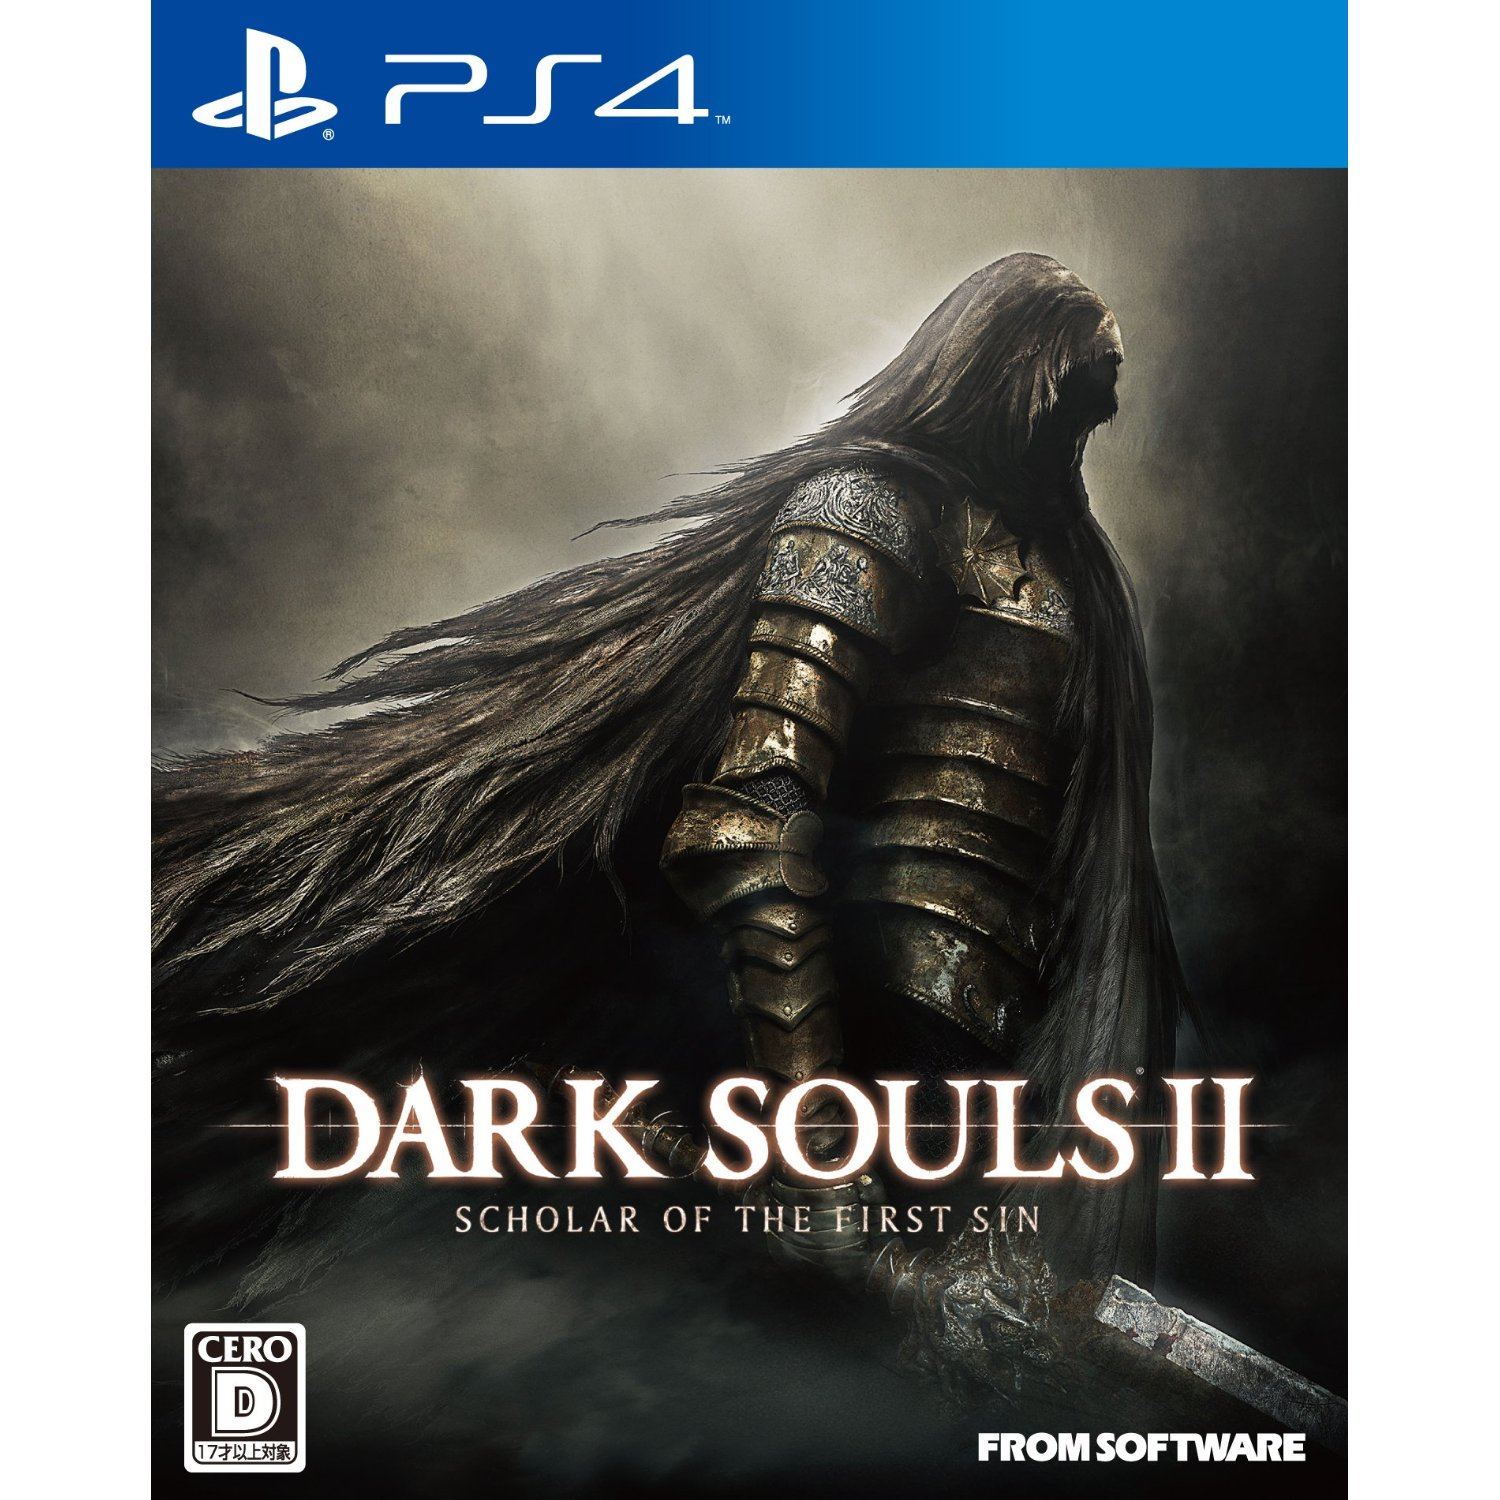 Dark Souls II: Scholar of the First Sin for PlayStation 4